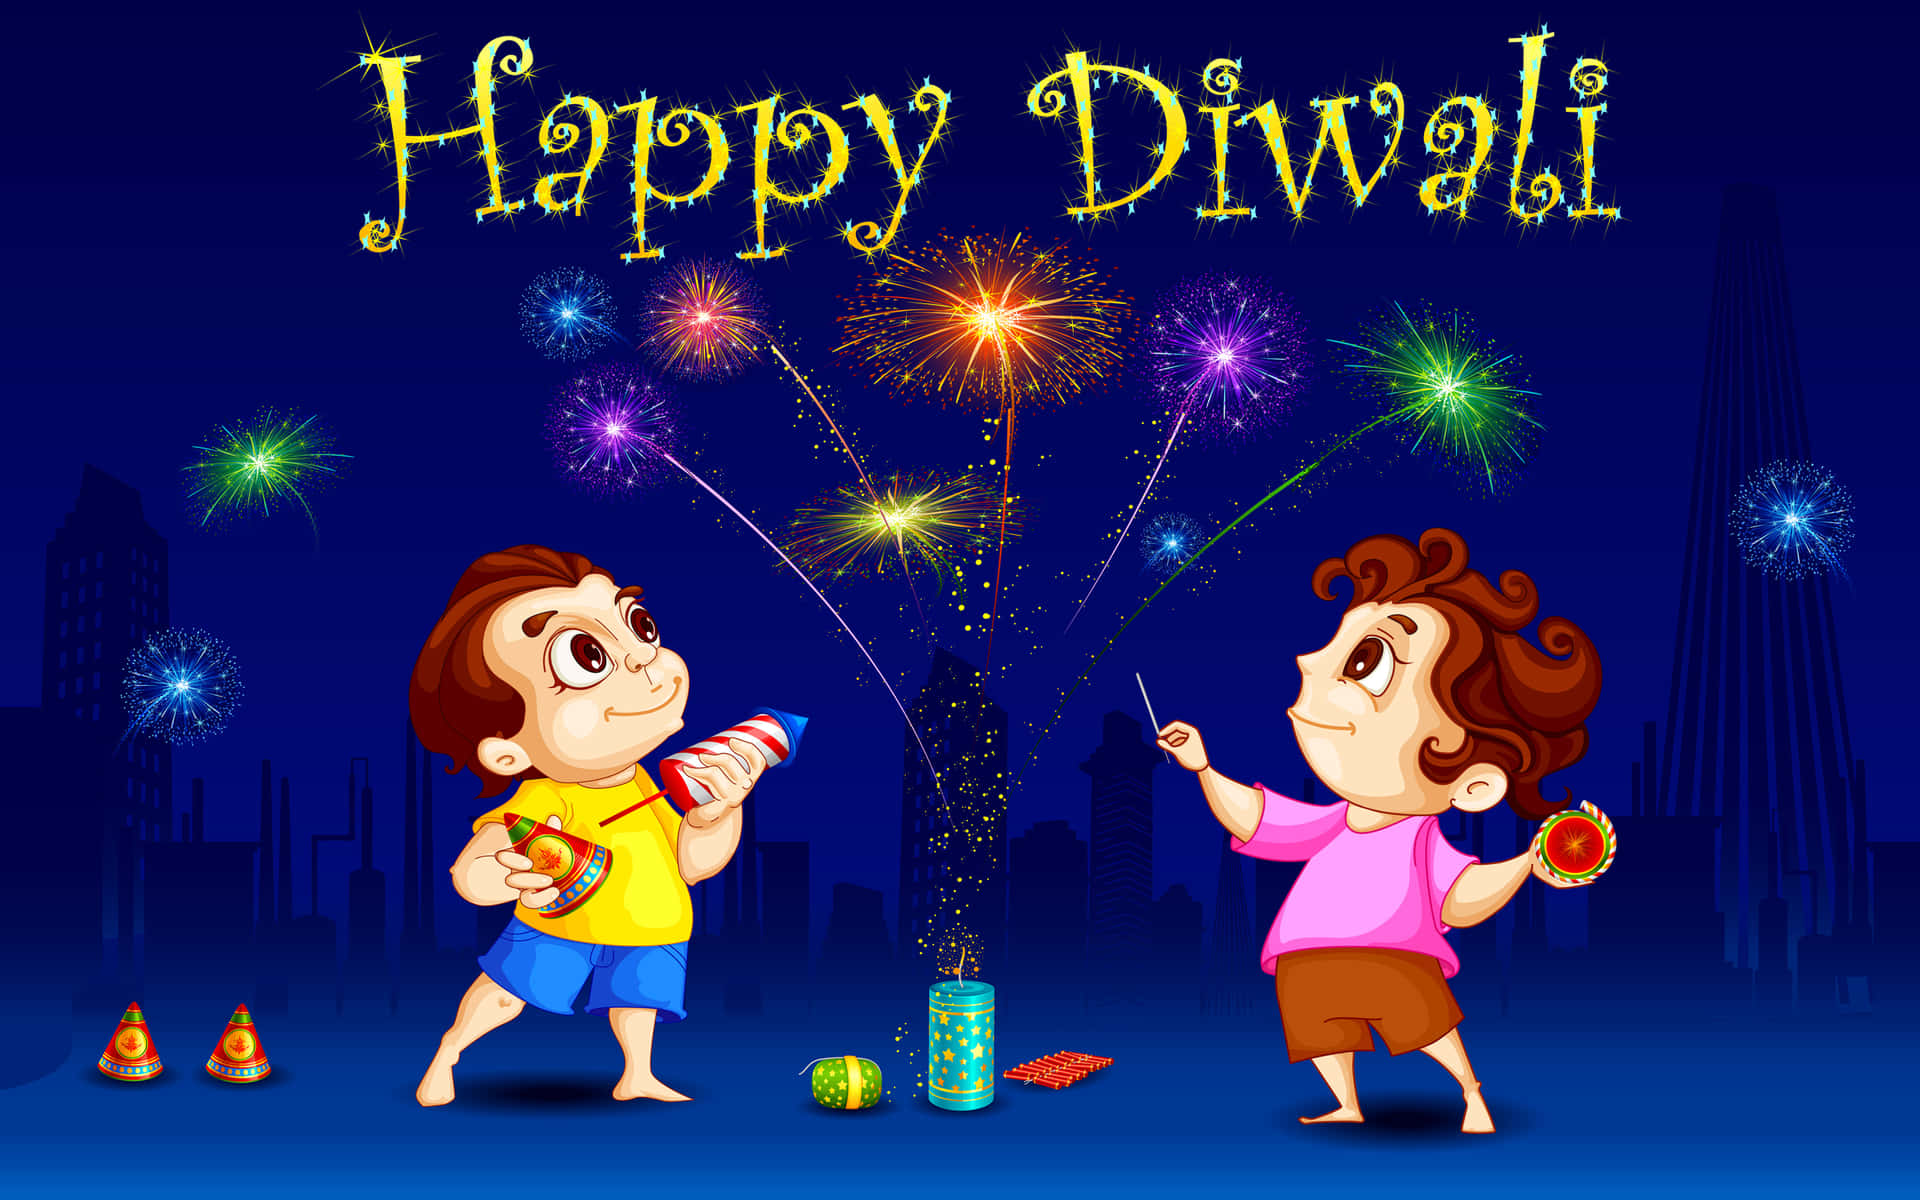 Happy Diwali From Our Family To Yours!